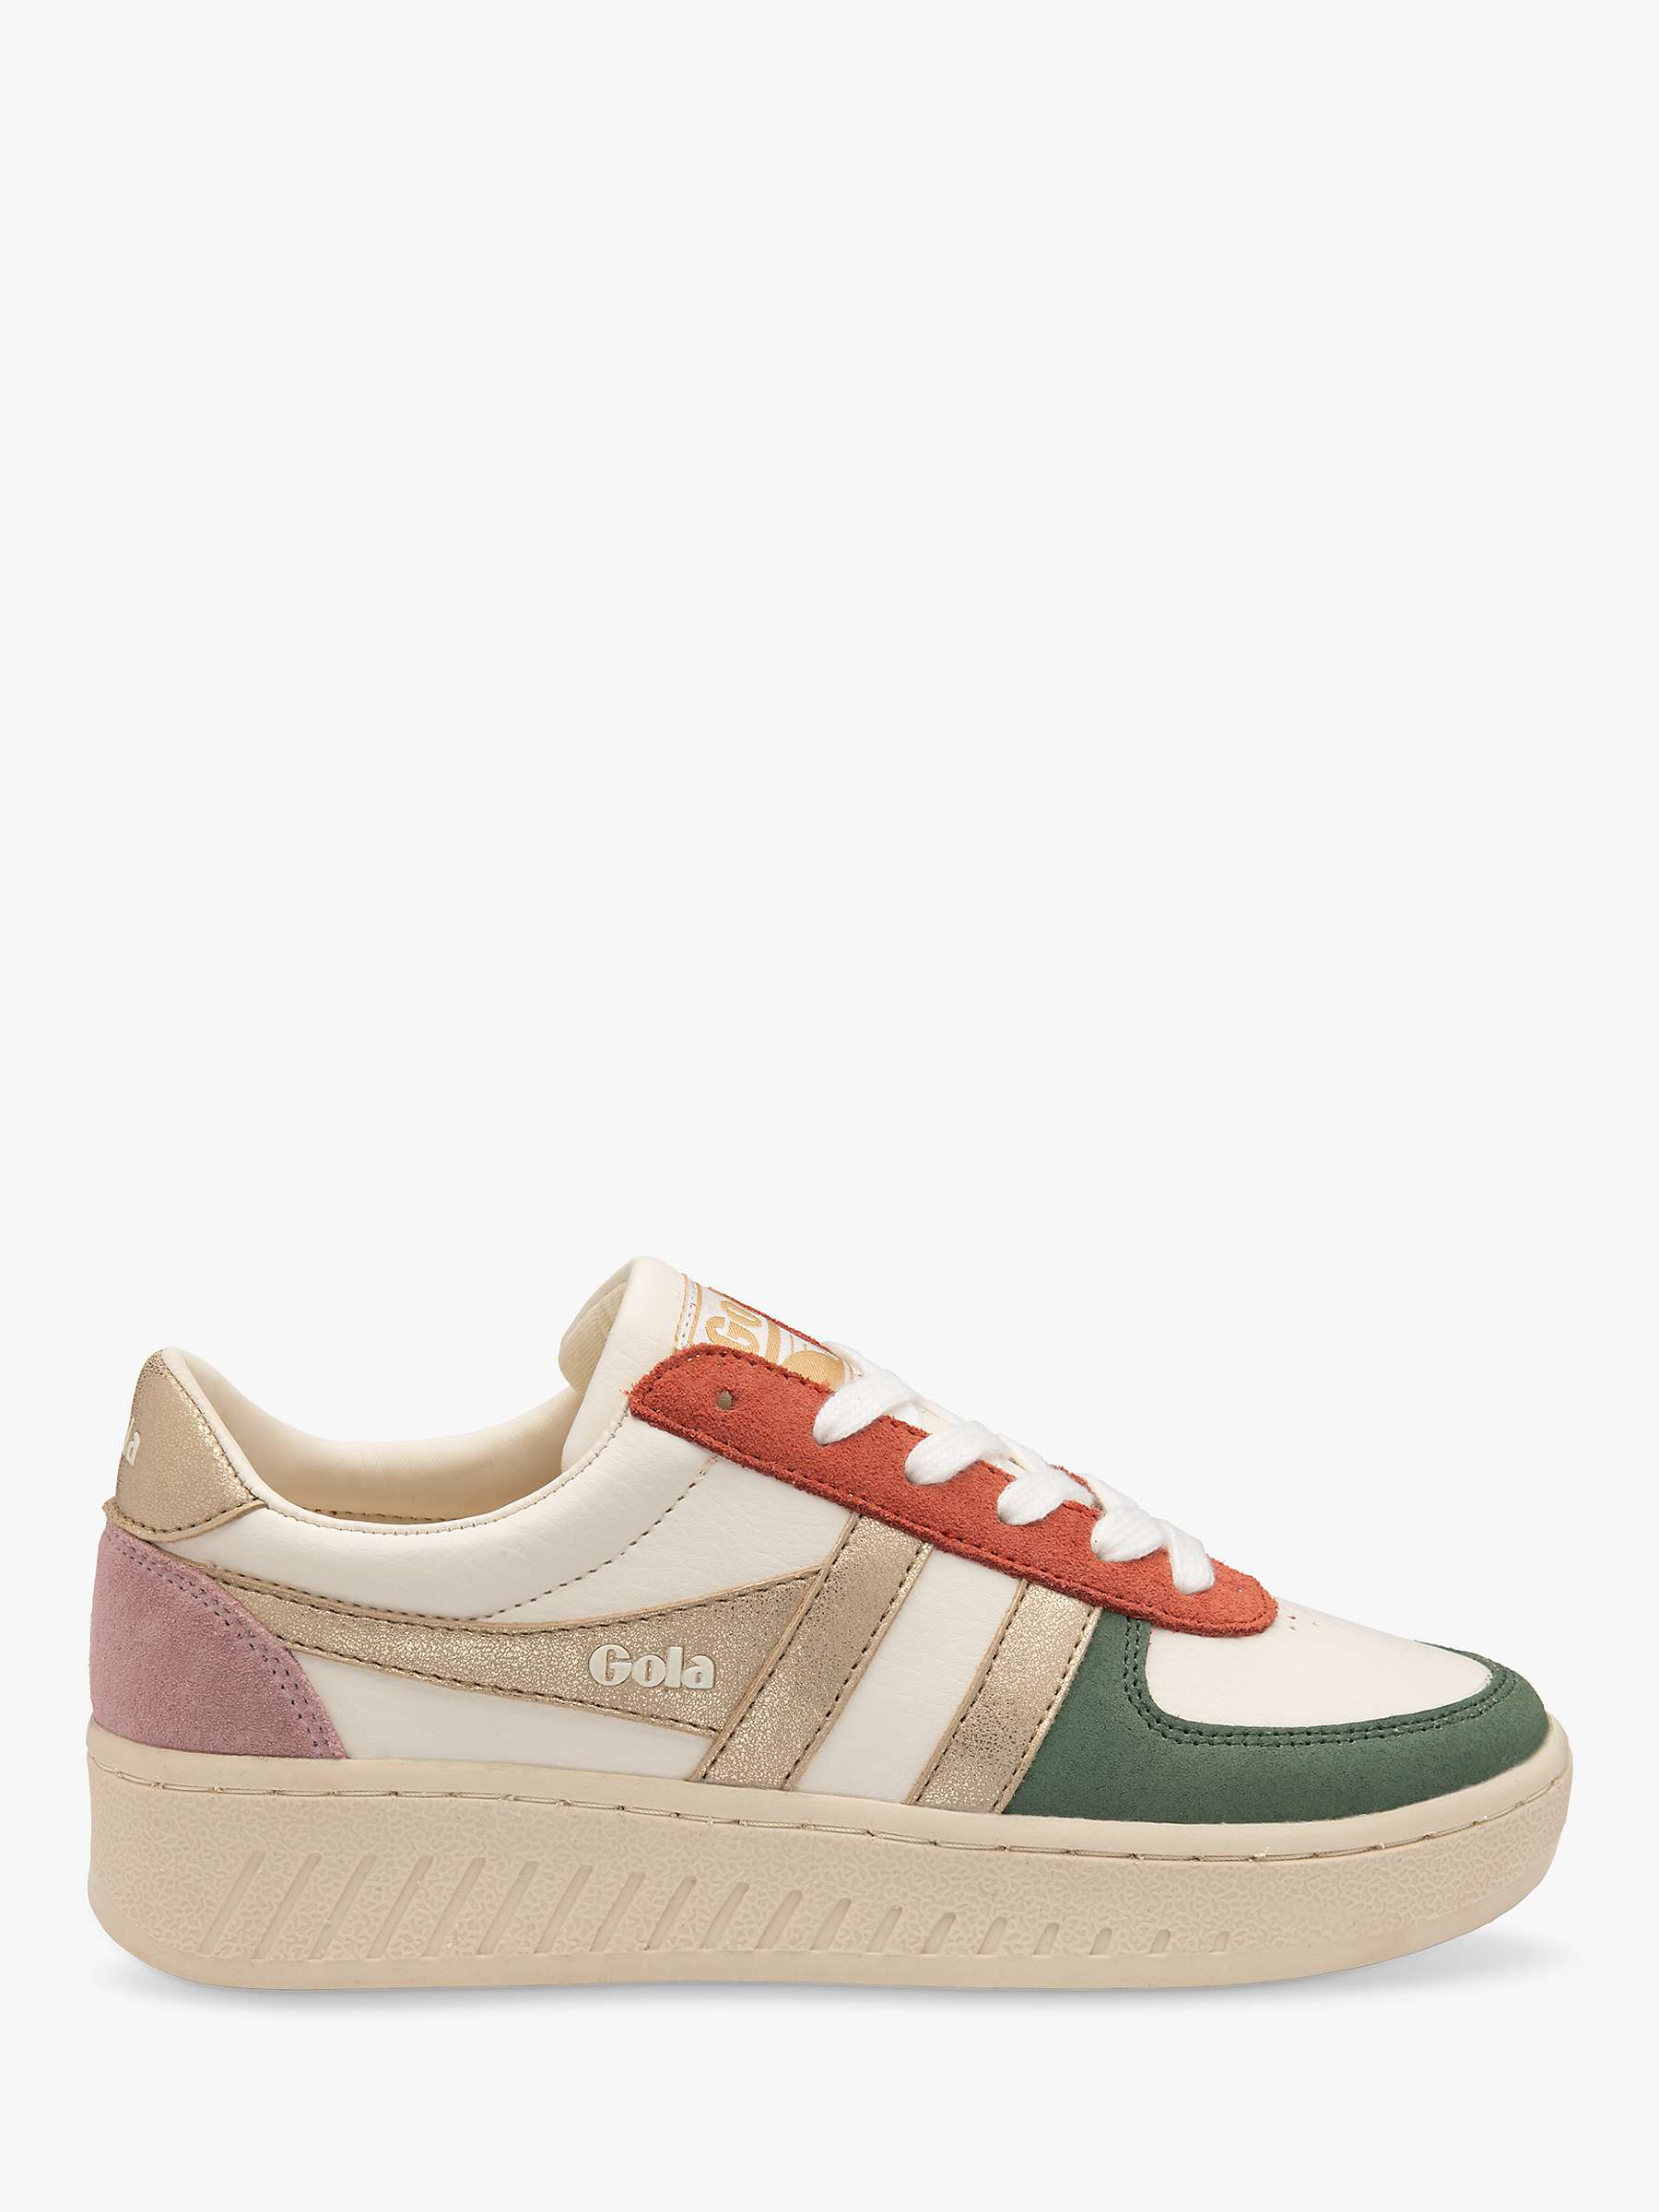 Buy Gola Classics Grandslam Quadrant Lace Up Trainers, Off White/Sage/Gold Online at johnlewis.com